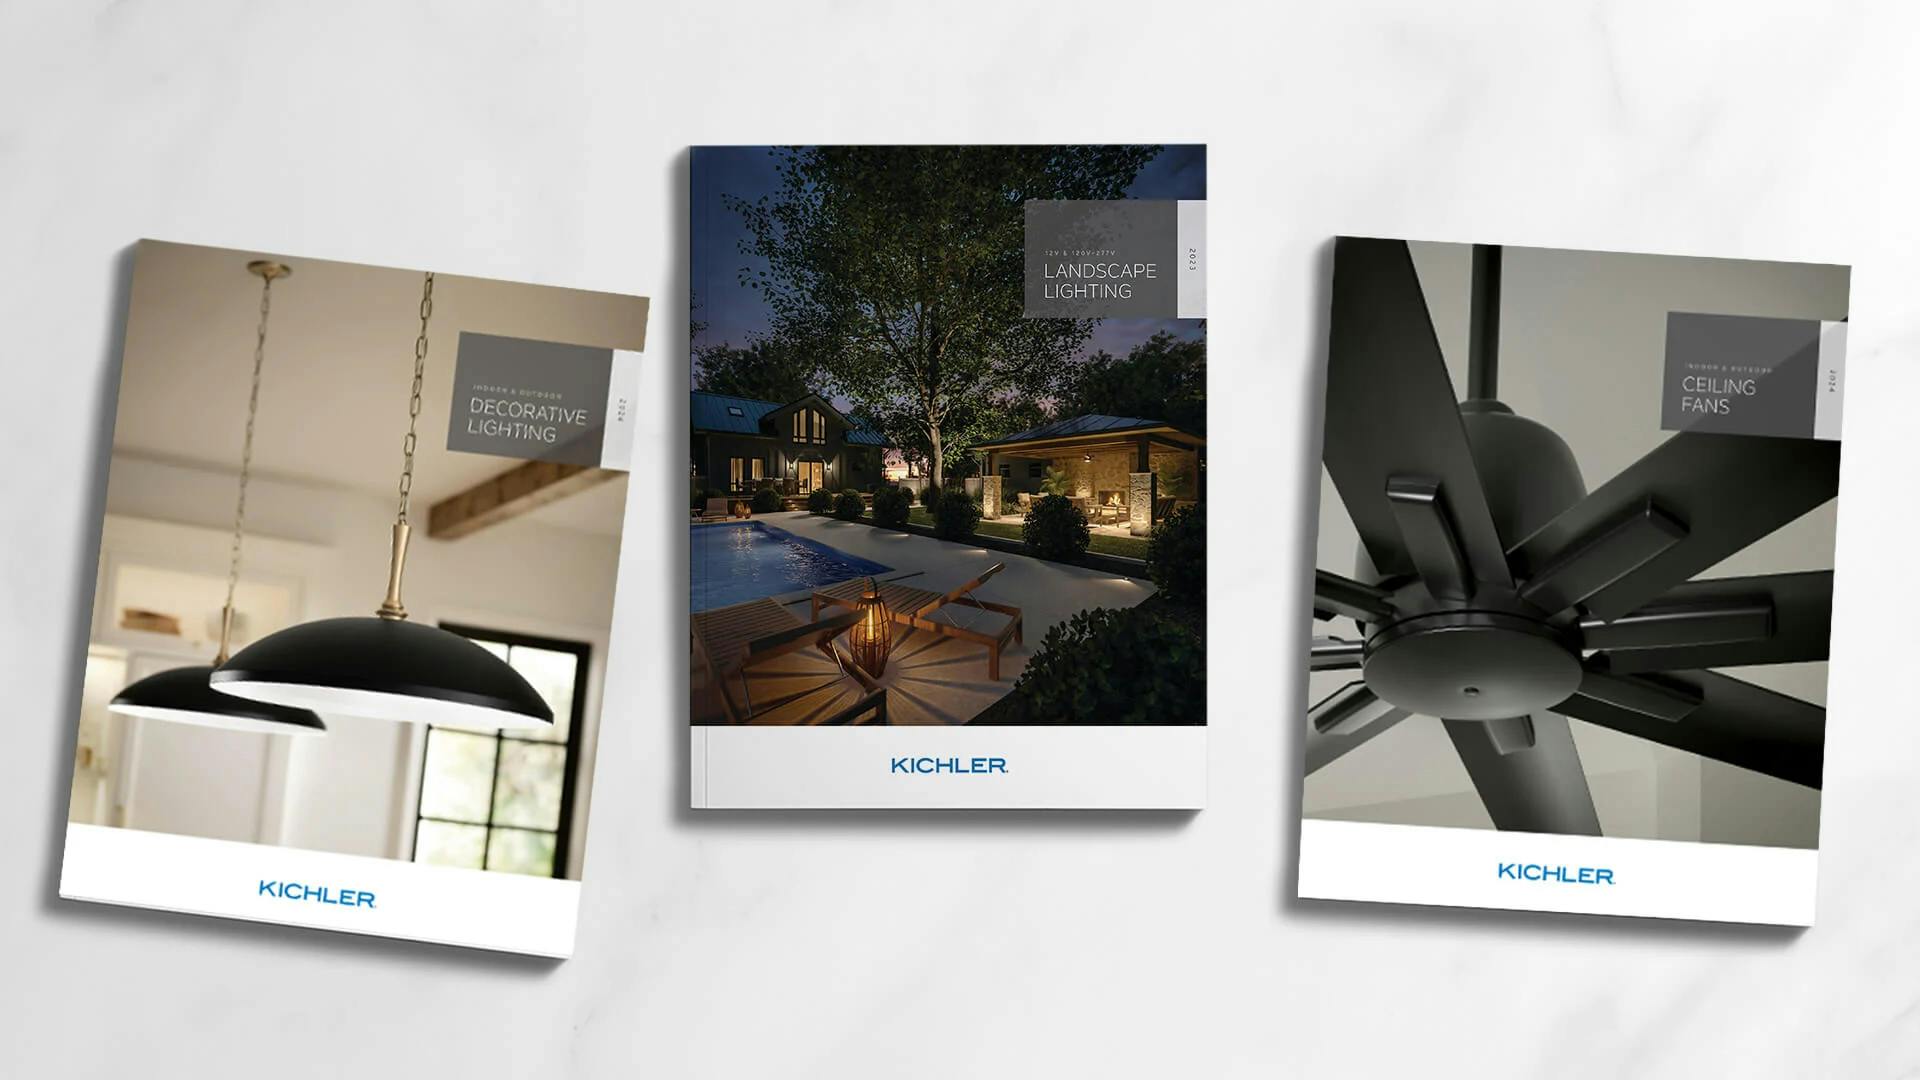 Three Kichler catalog covers featuring pendant lights, a lit outdoor scene and a ceiling fan.